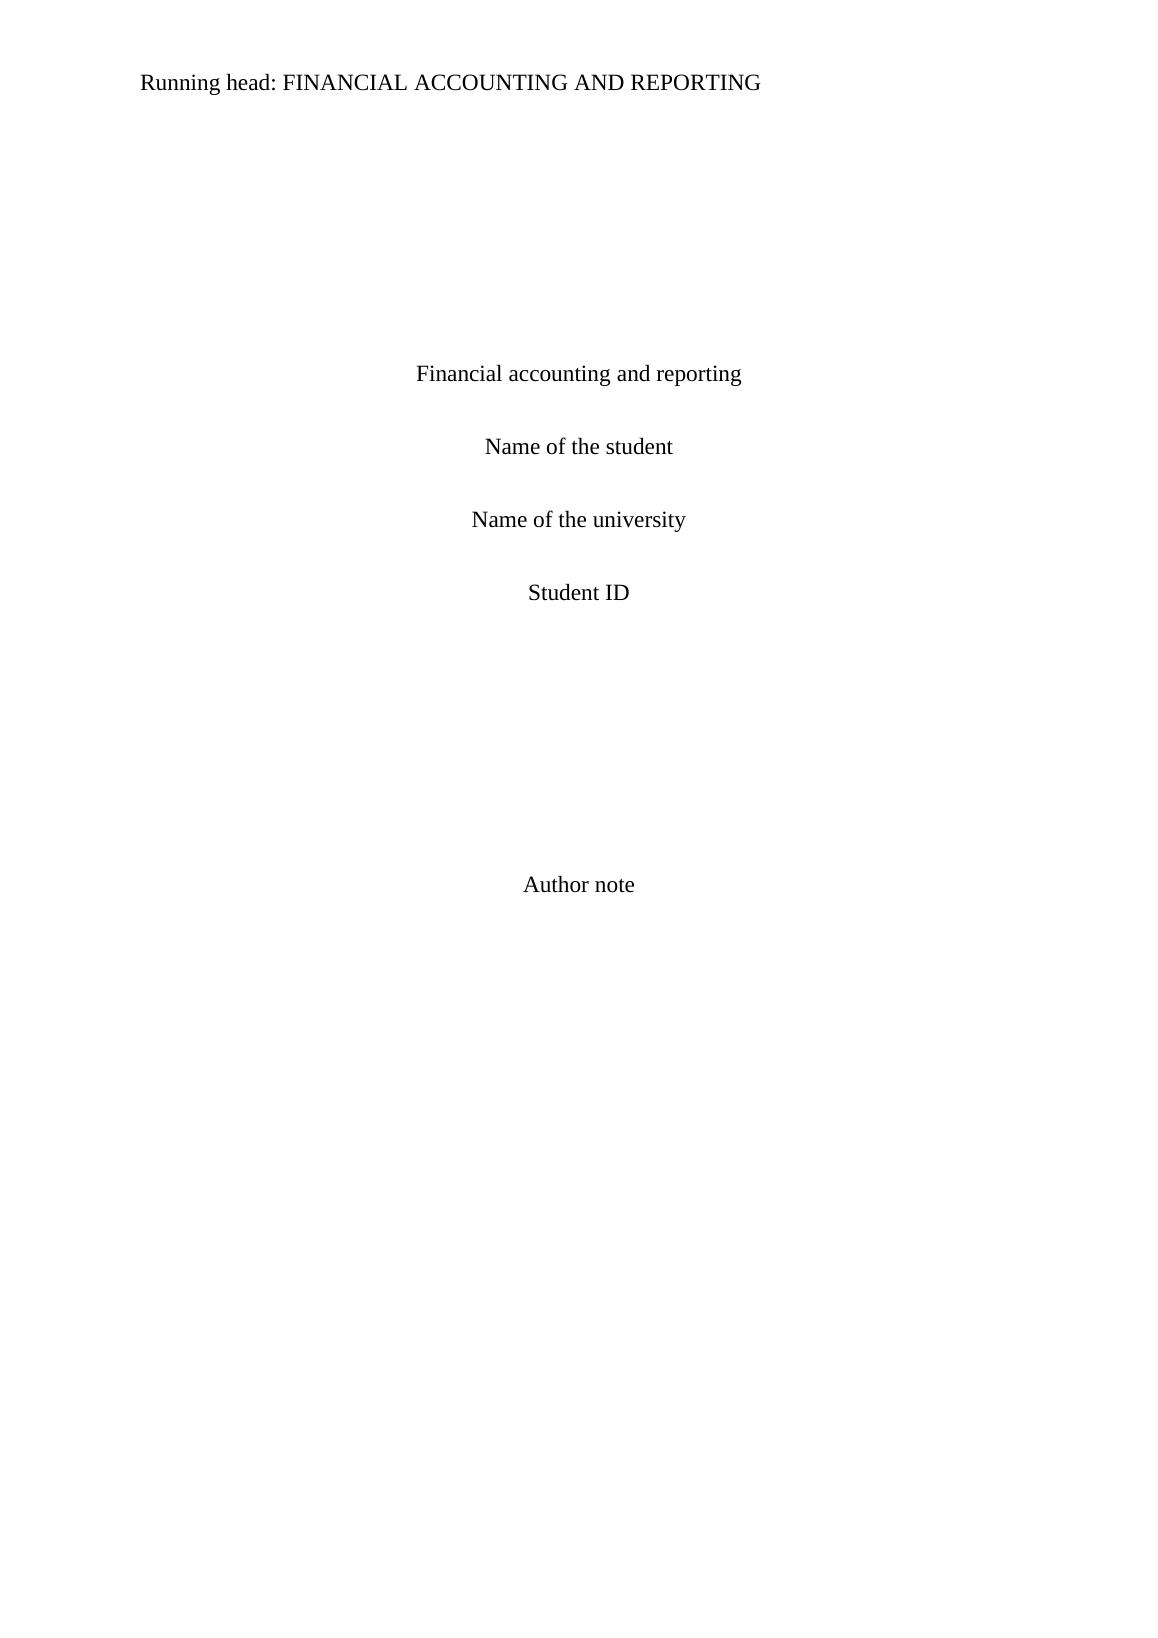 Financial Accounting and Reporting (pdf)_1